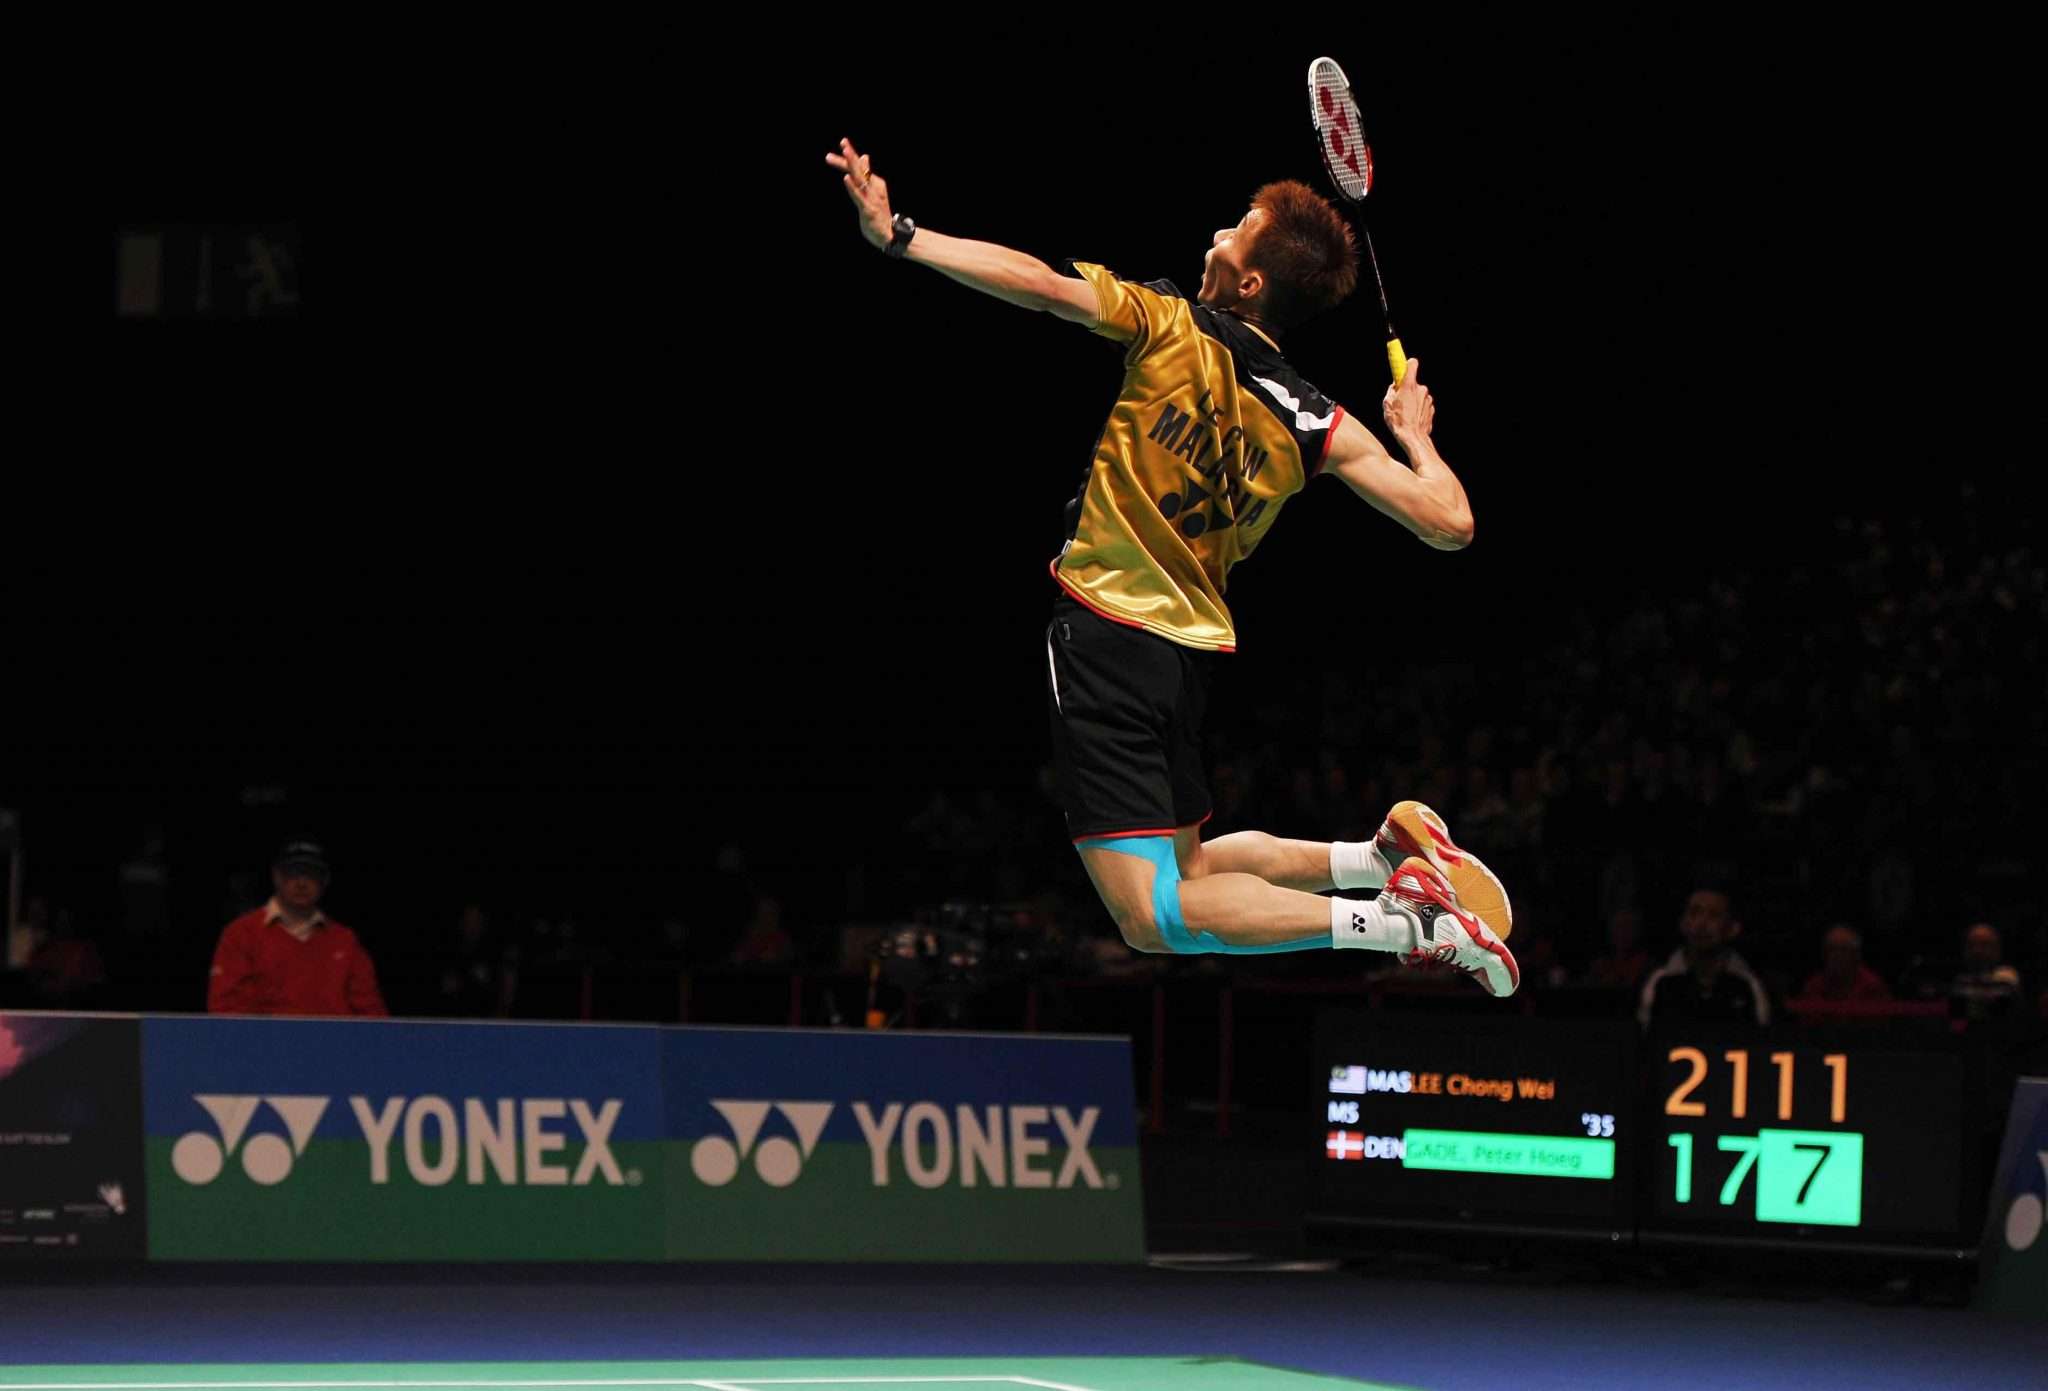 High 12 Finest Yonex Badminton Sneakers To Purchase In India for finest efficiency